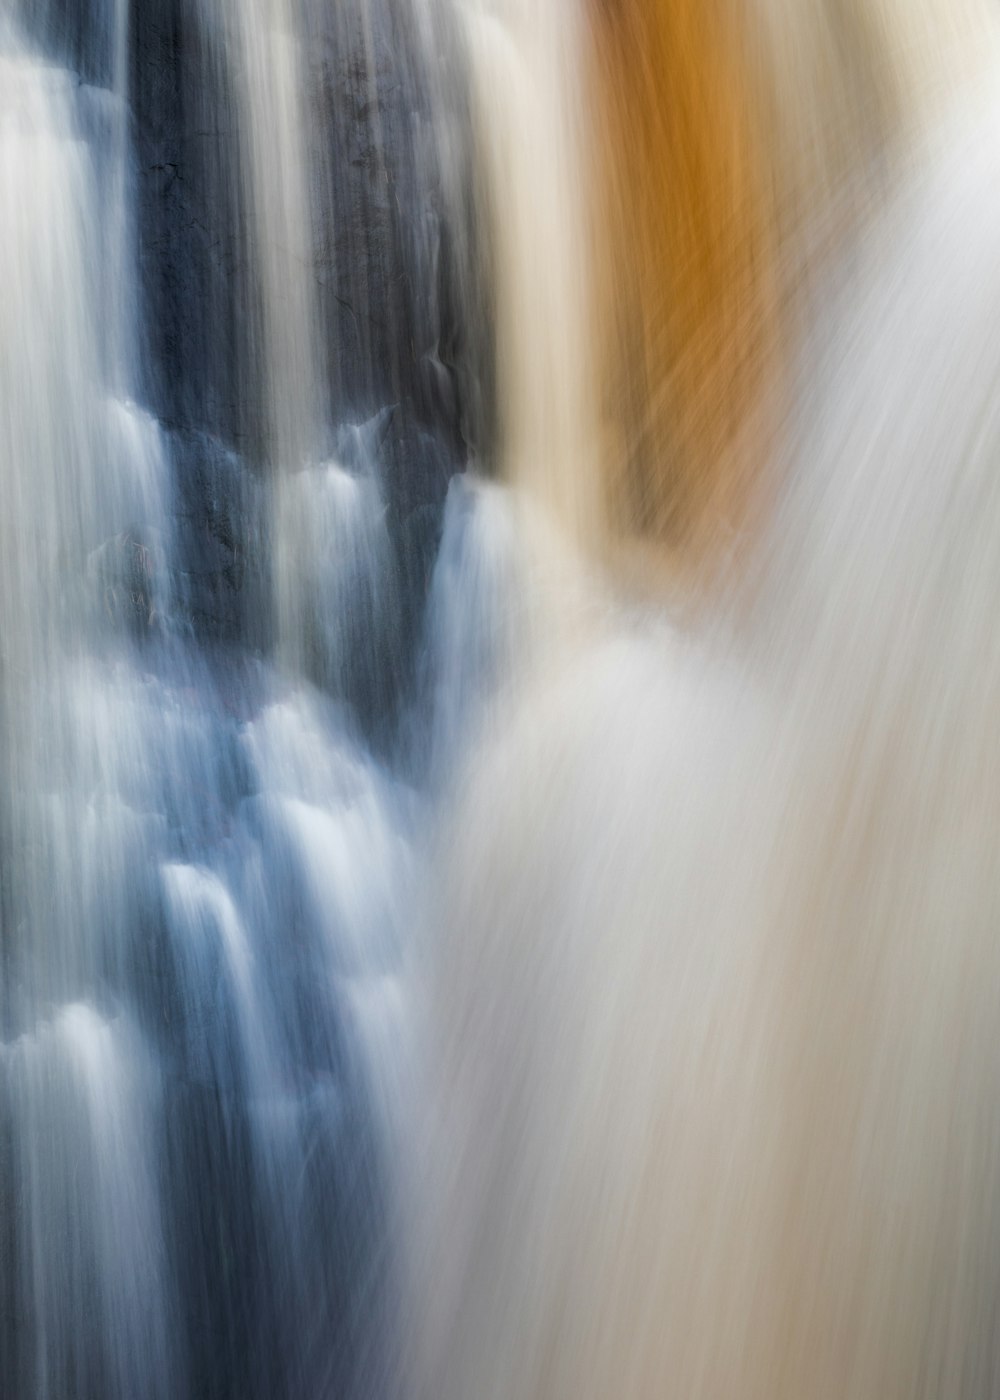 a blurry photo of a waterfall with water